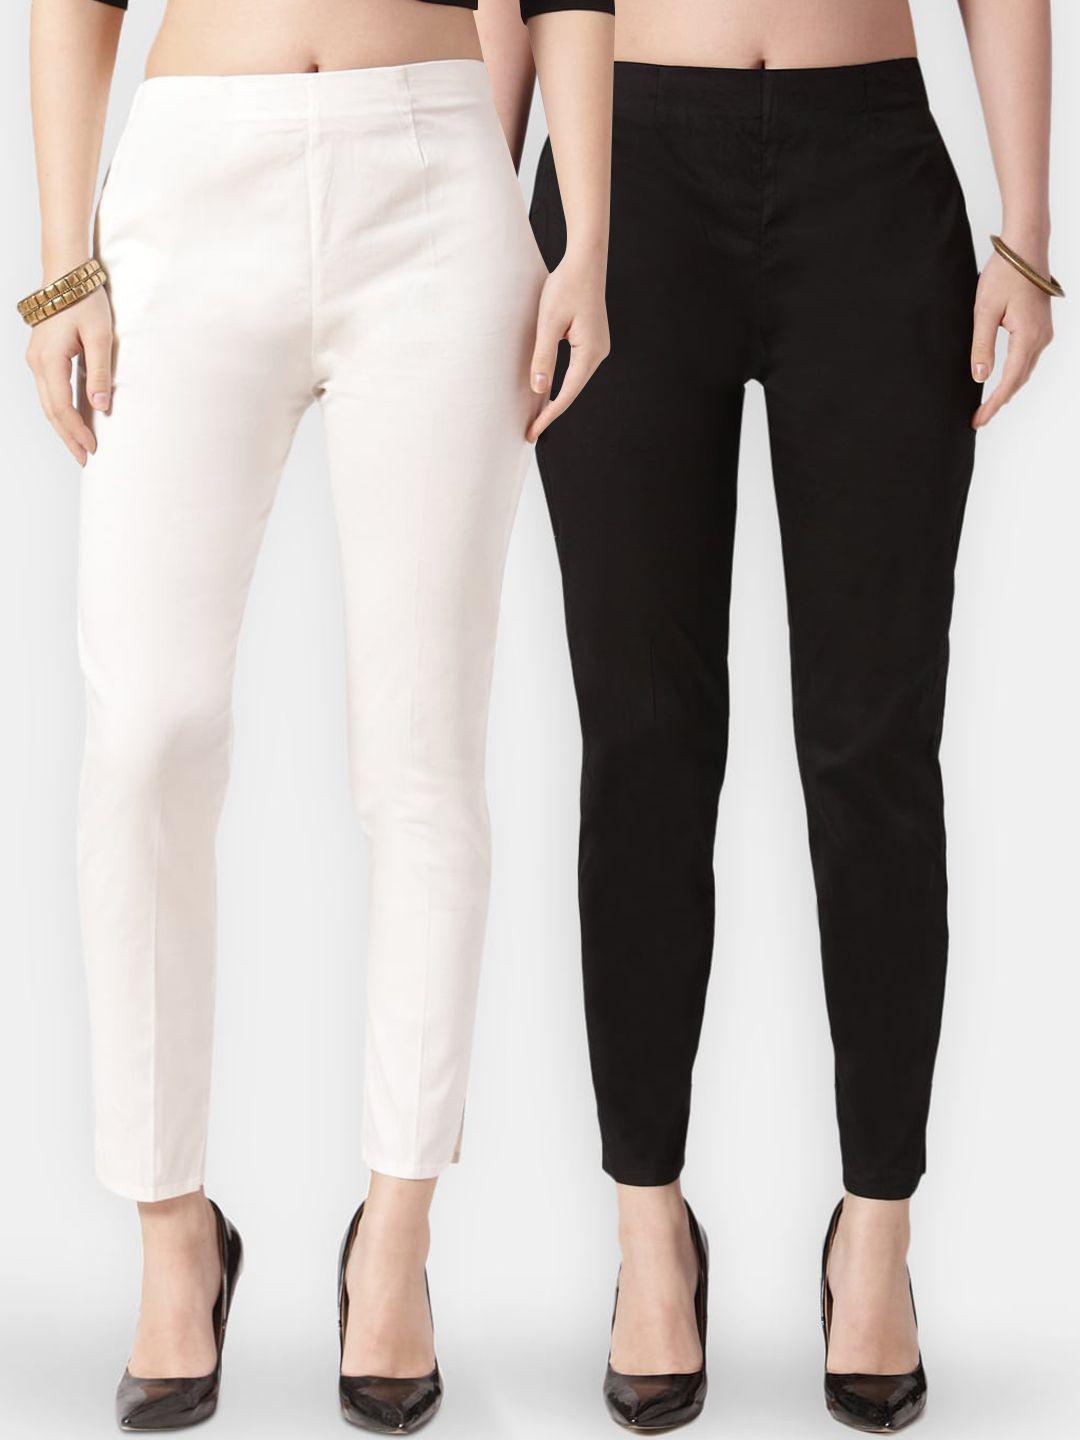 jompers women pack of 2 black & white smart slim fit solid cigarette trousers